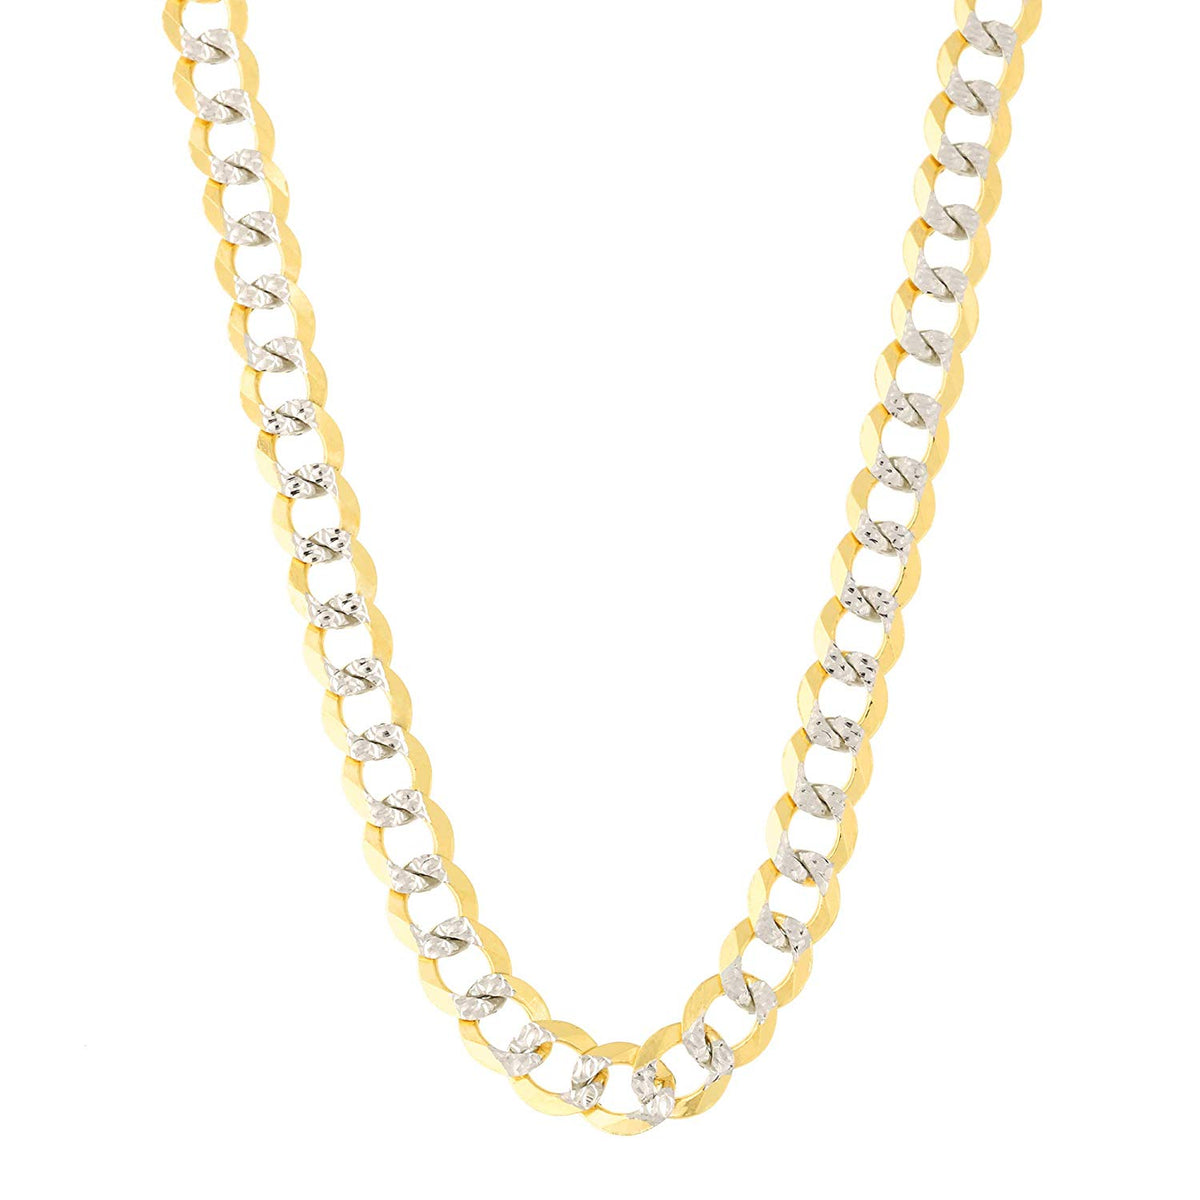 14k 2 Tone Yellow And White Gold Curb Chain Necklace, 4.7mm